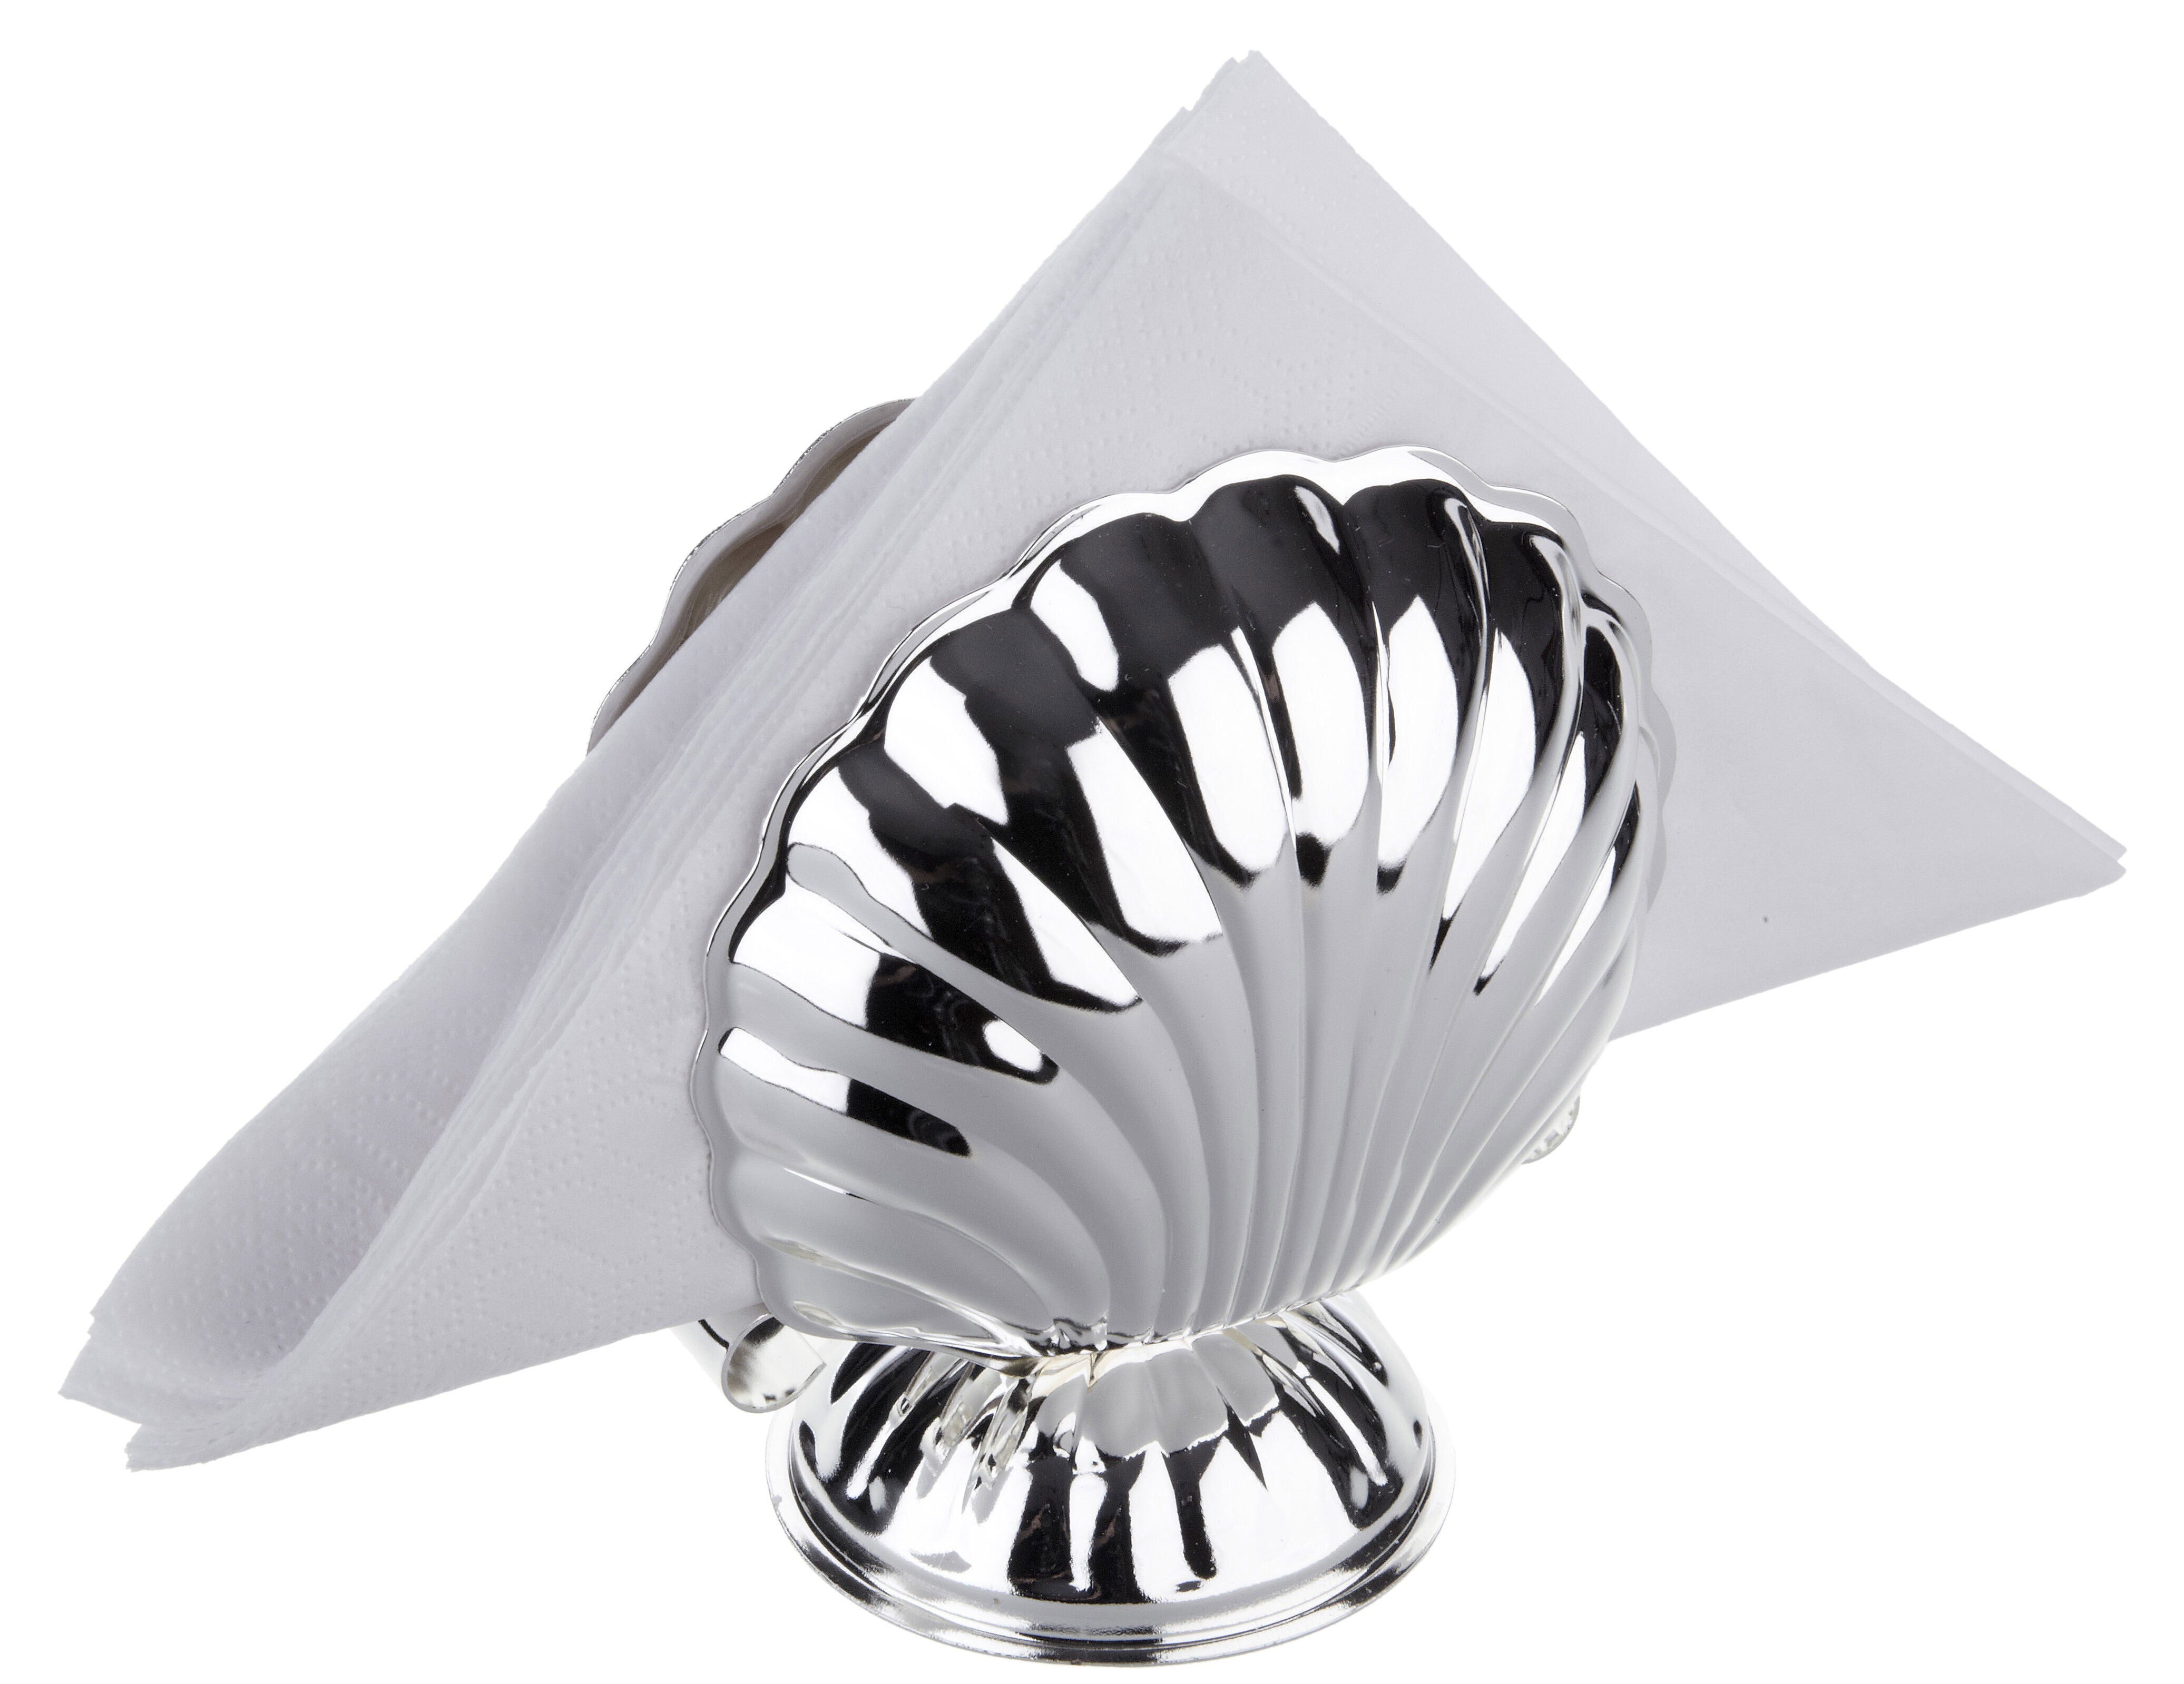 Queen Anne Serviette Napkin Holder Silver Plated Sea Shell Tarnish Resistant - Royal Gift